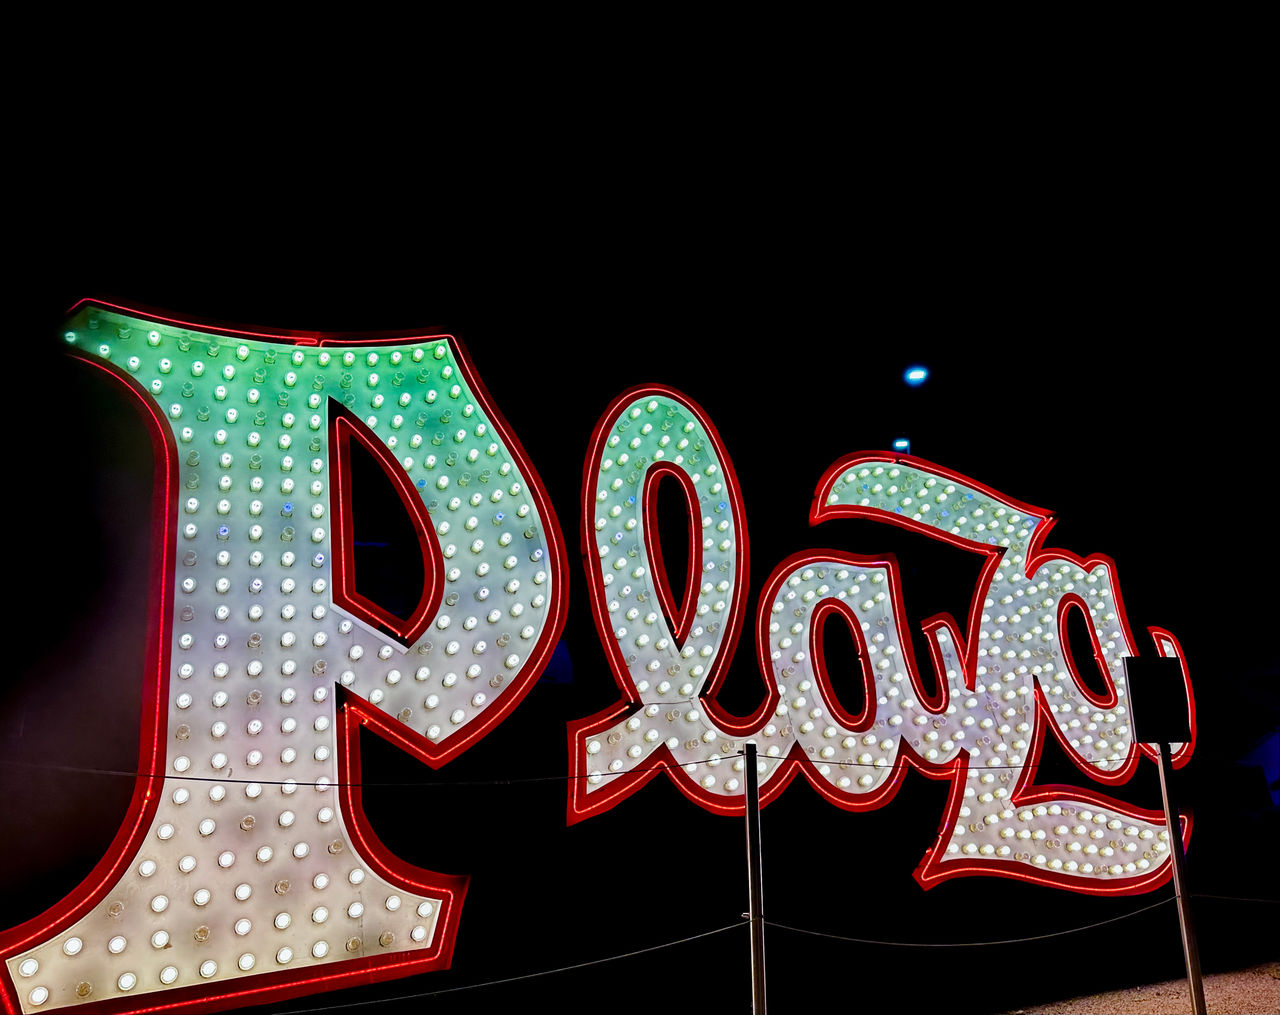 The Old Days Old Vegas Illuminated Neon Night Text Communication Font Sign Signage Neon Sign No People Western Script Red Lighting Equipment Arts Culture And Entertainment Outdoors Holiday Architecture